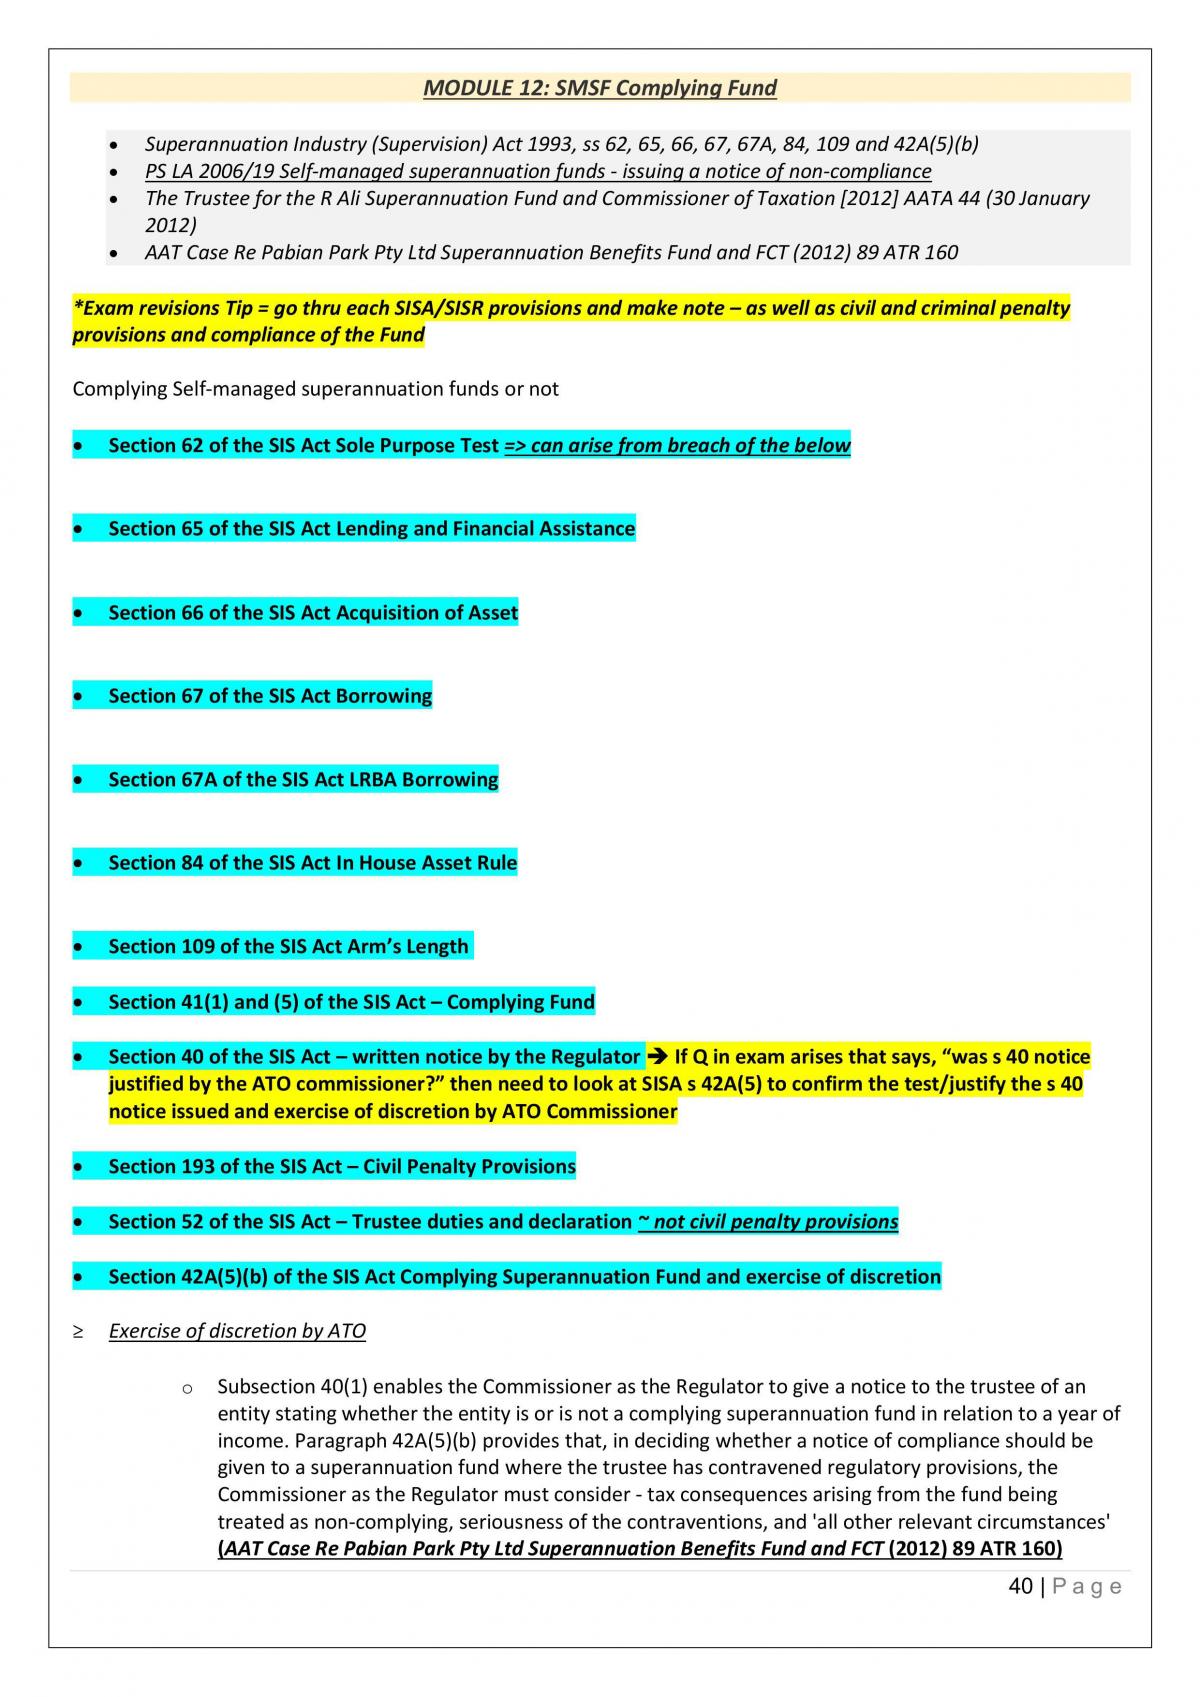 Self-Managed Superannuation and Trusts 200900 - Final Exam Notes - Page 40